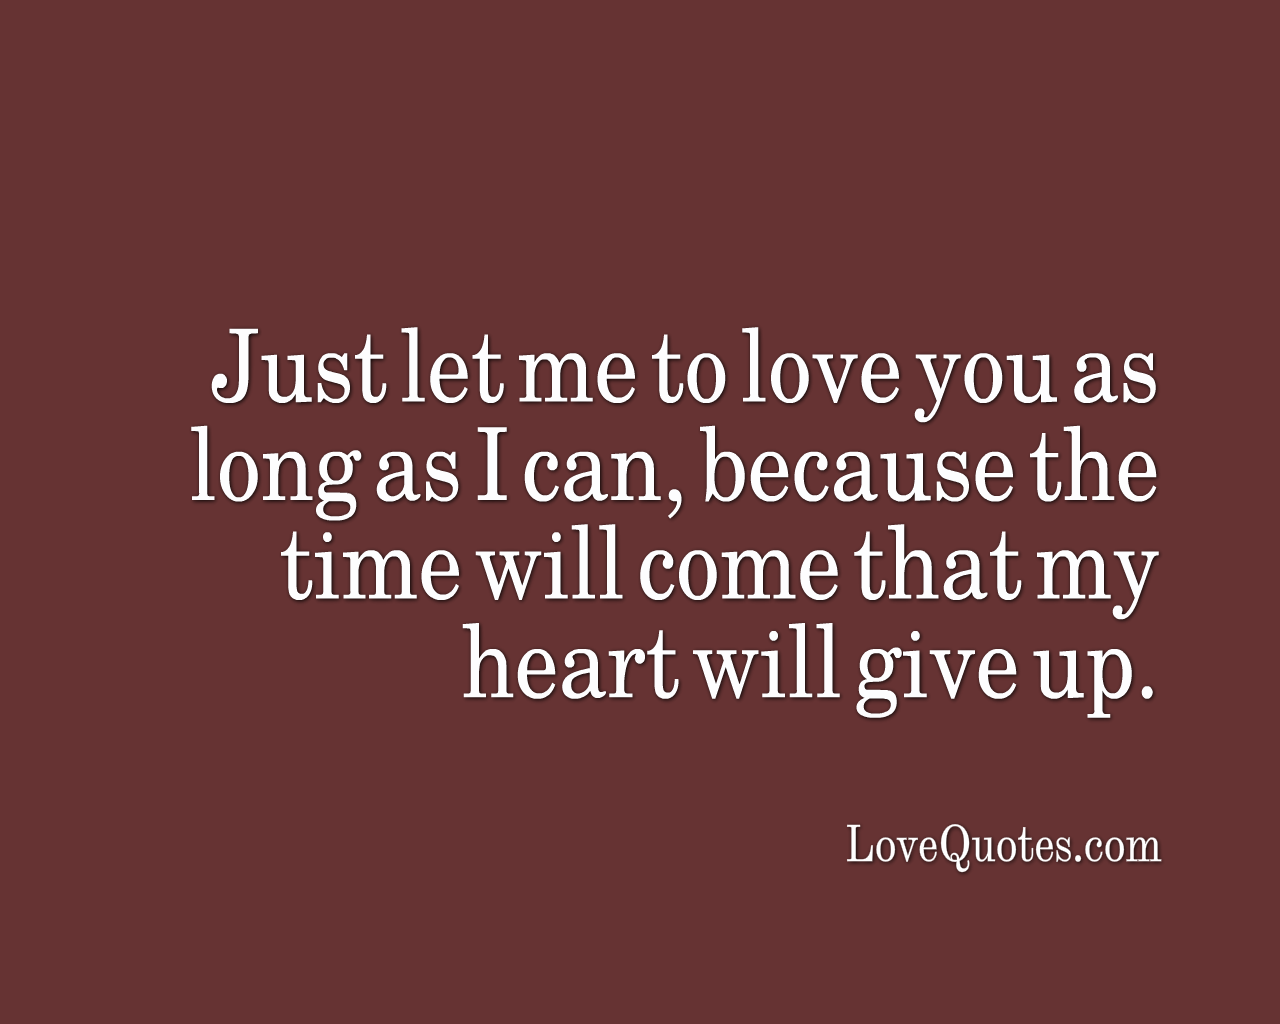 I Just Want You Here Close To Me love love quotes quotes quote in